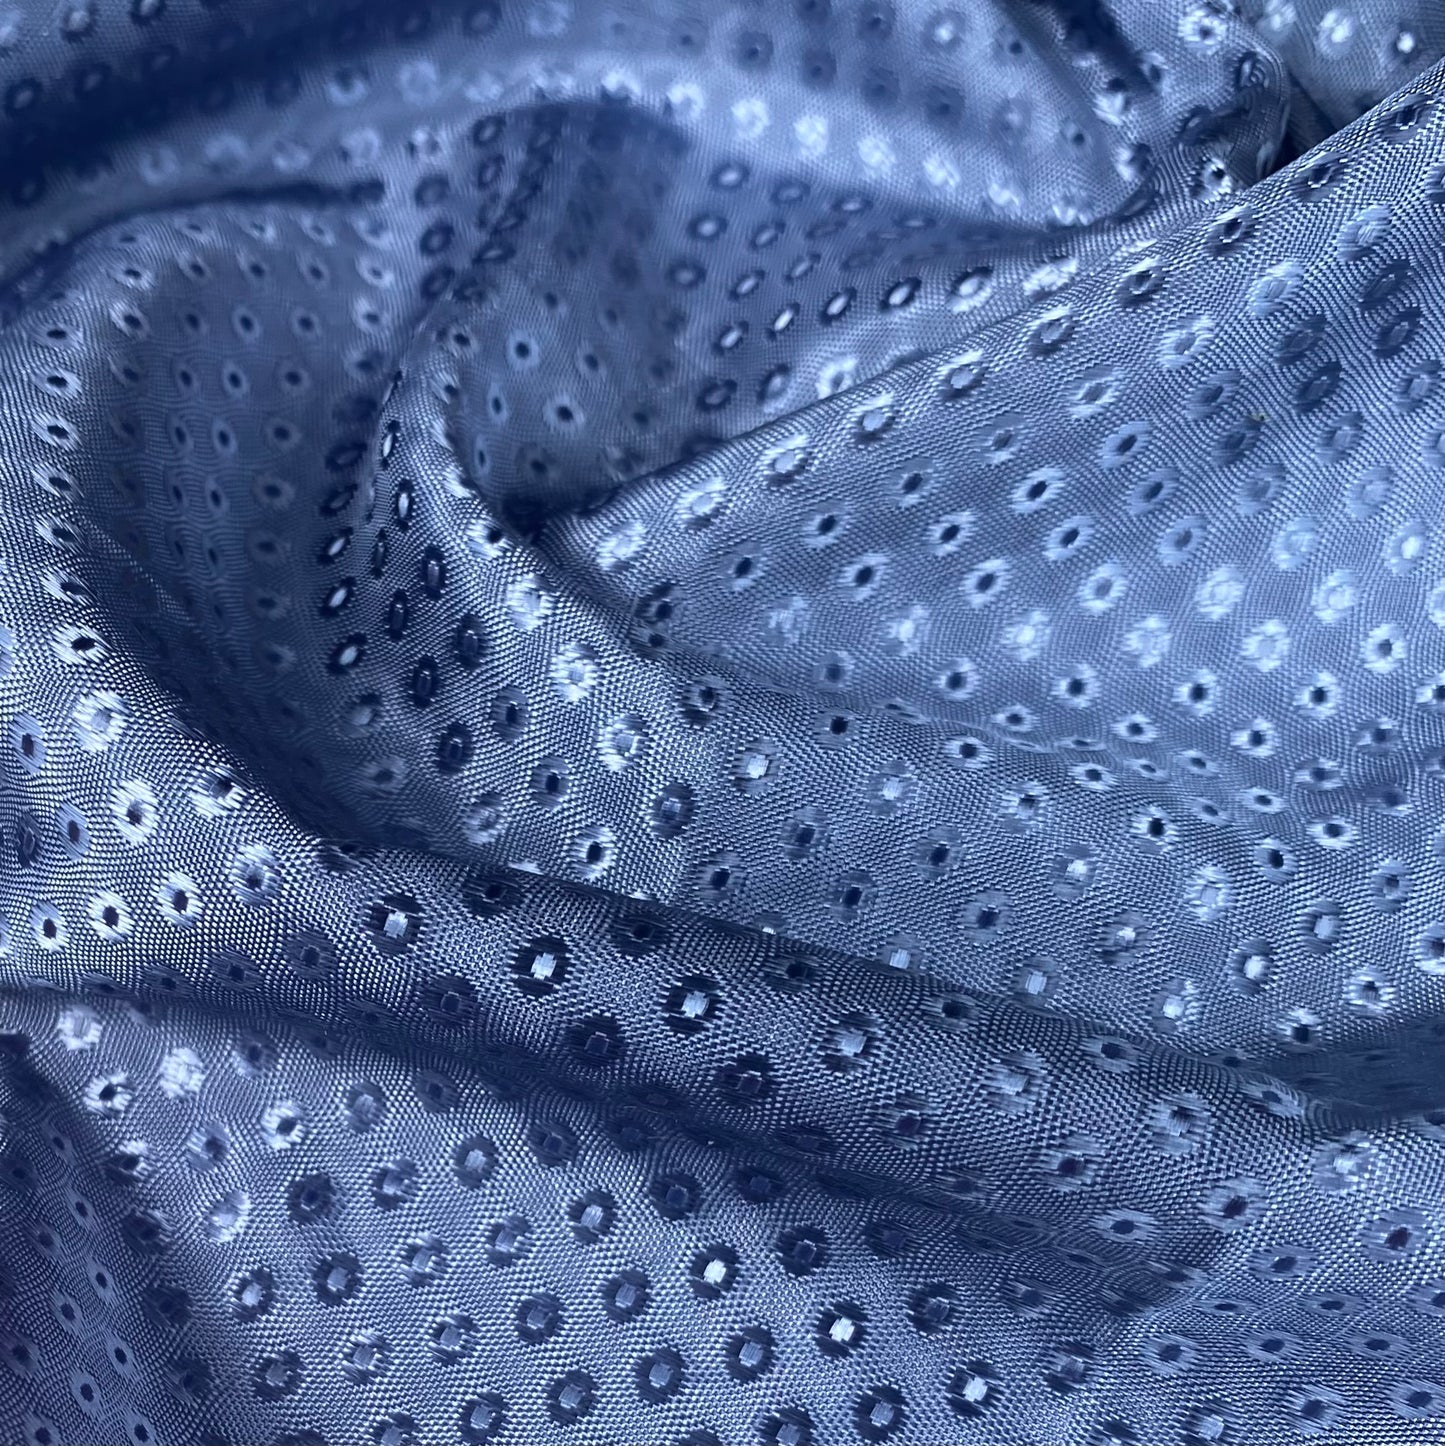 Patterned Lining - Blue